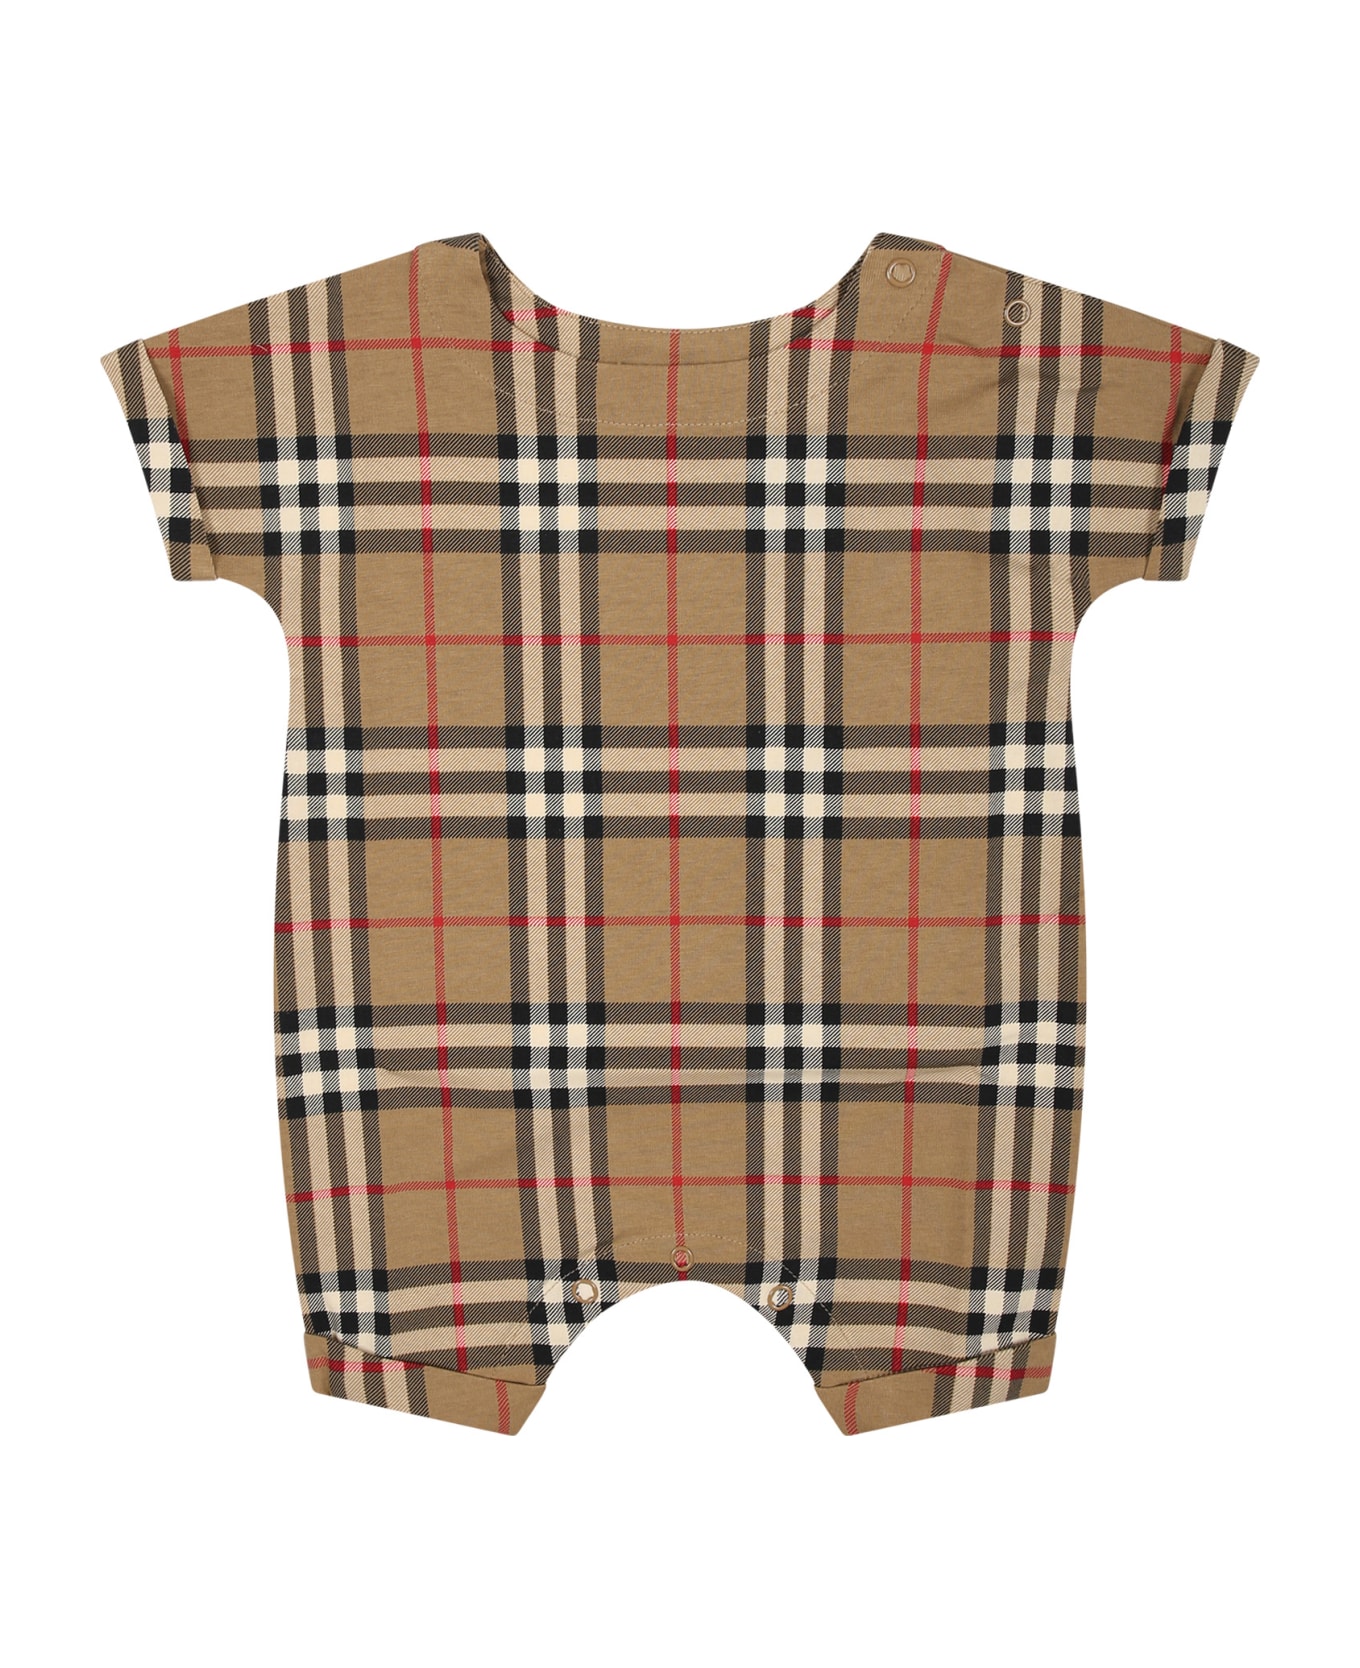 Burberry Beige Baby Bodysuit With Iconic All-over Vintage Check - Beige